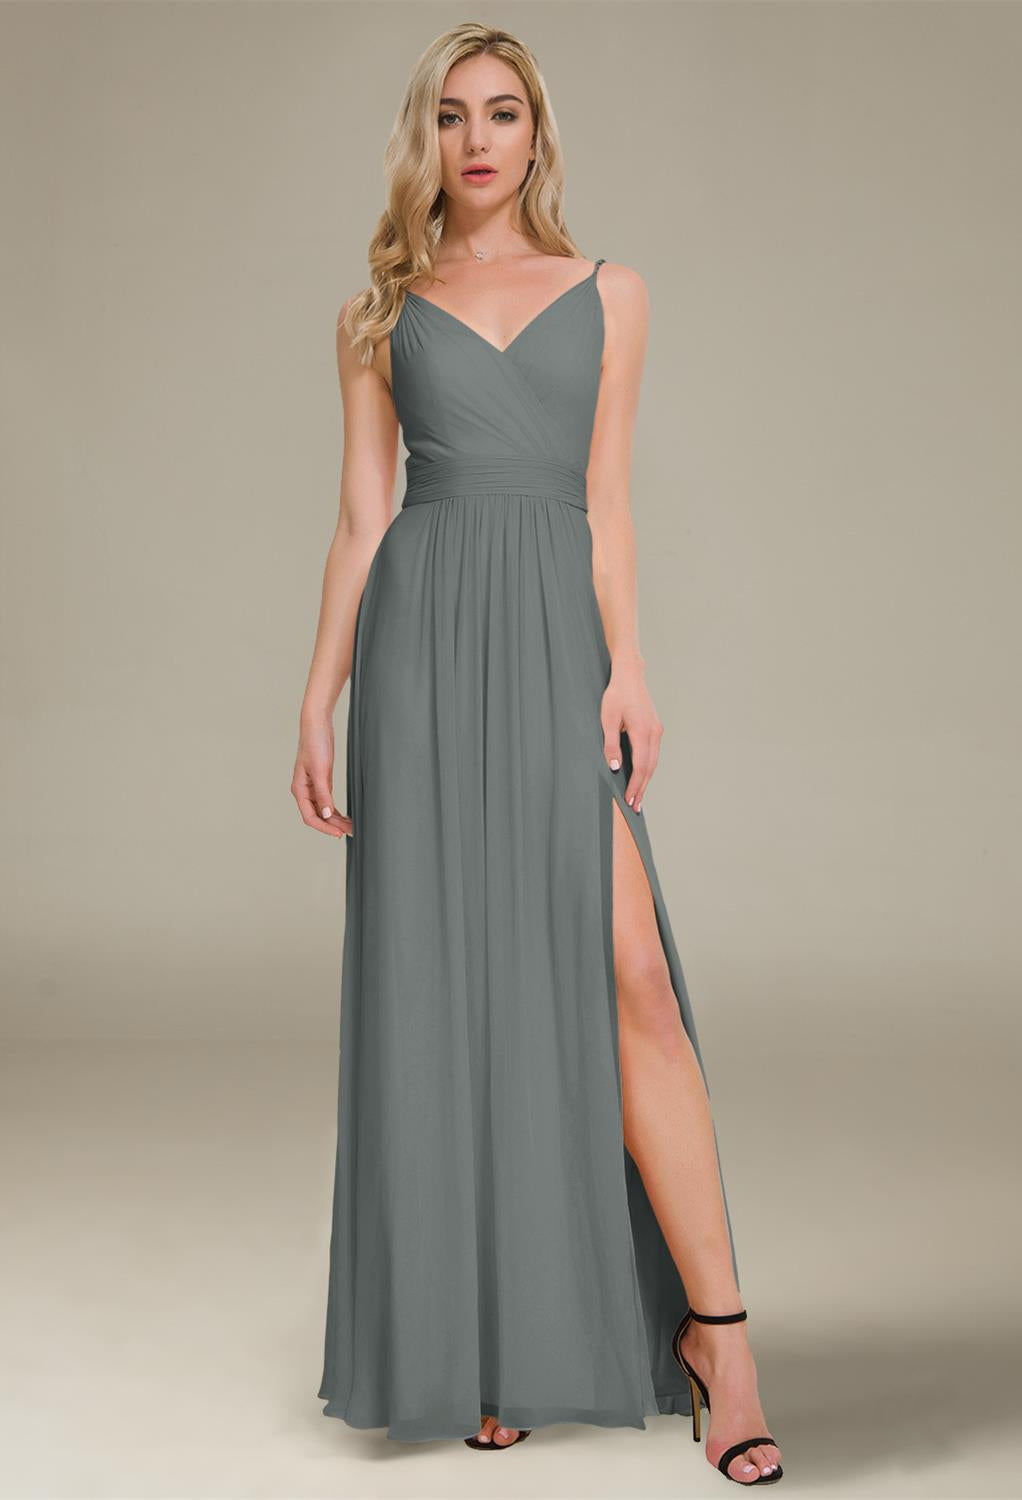 A-line v-neck floor-length Joie - Chiffon Bridesmaid Dress - Off the Rack available at bridal shops in London by Bergamot Bridal.